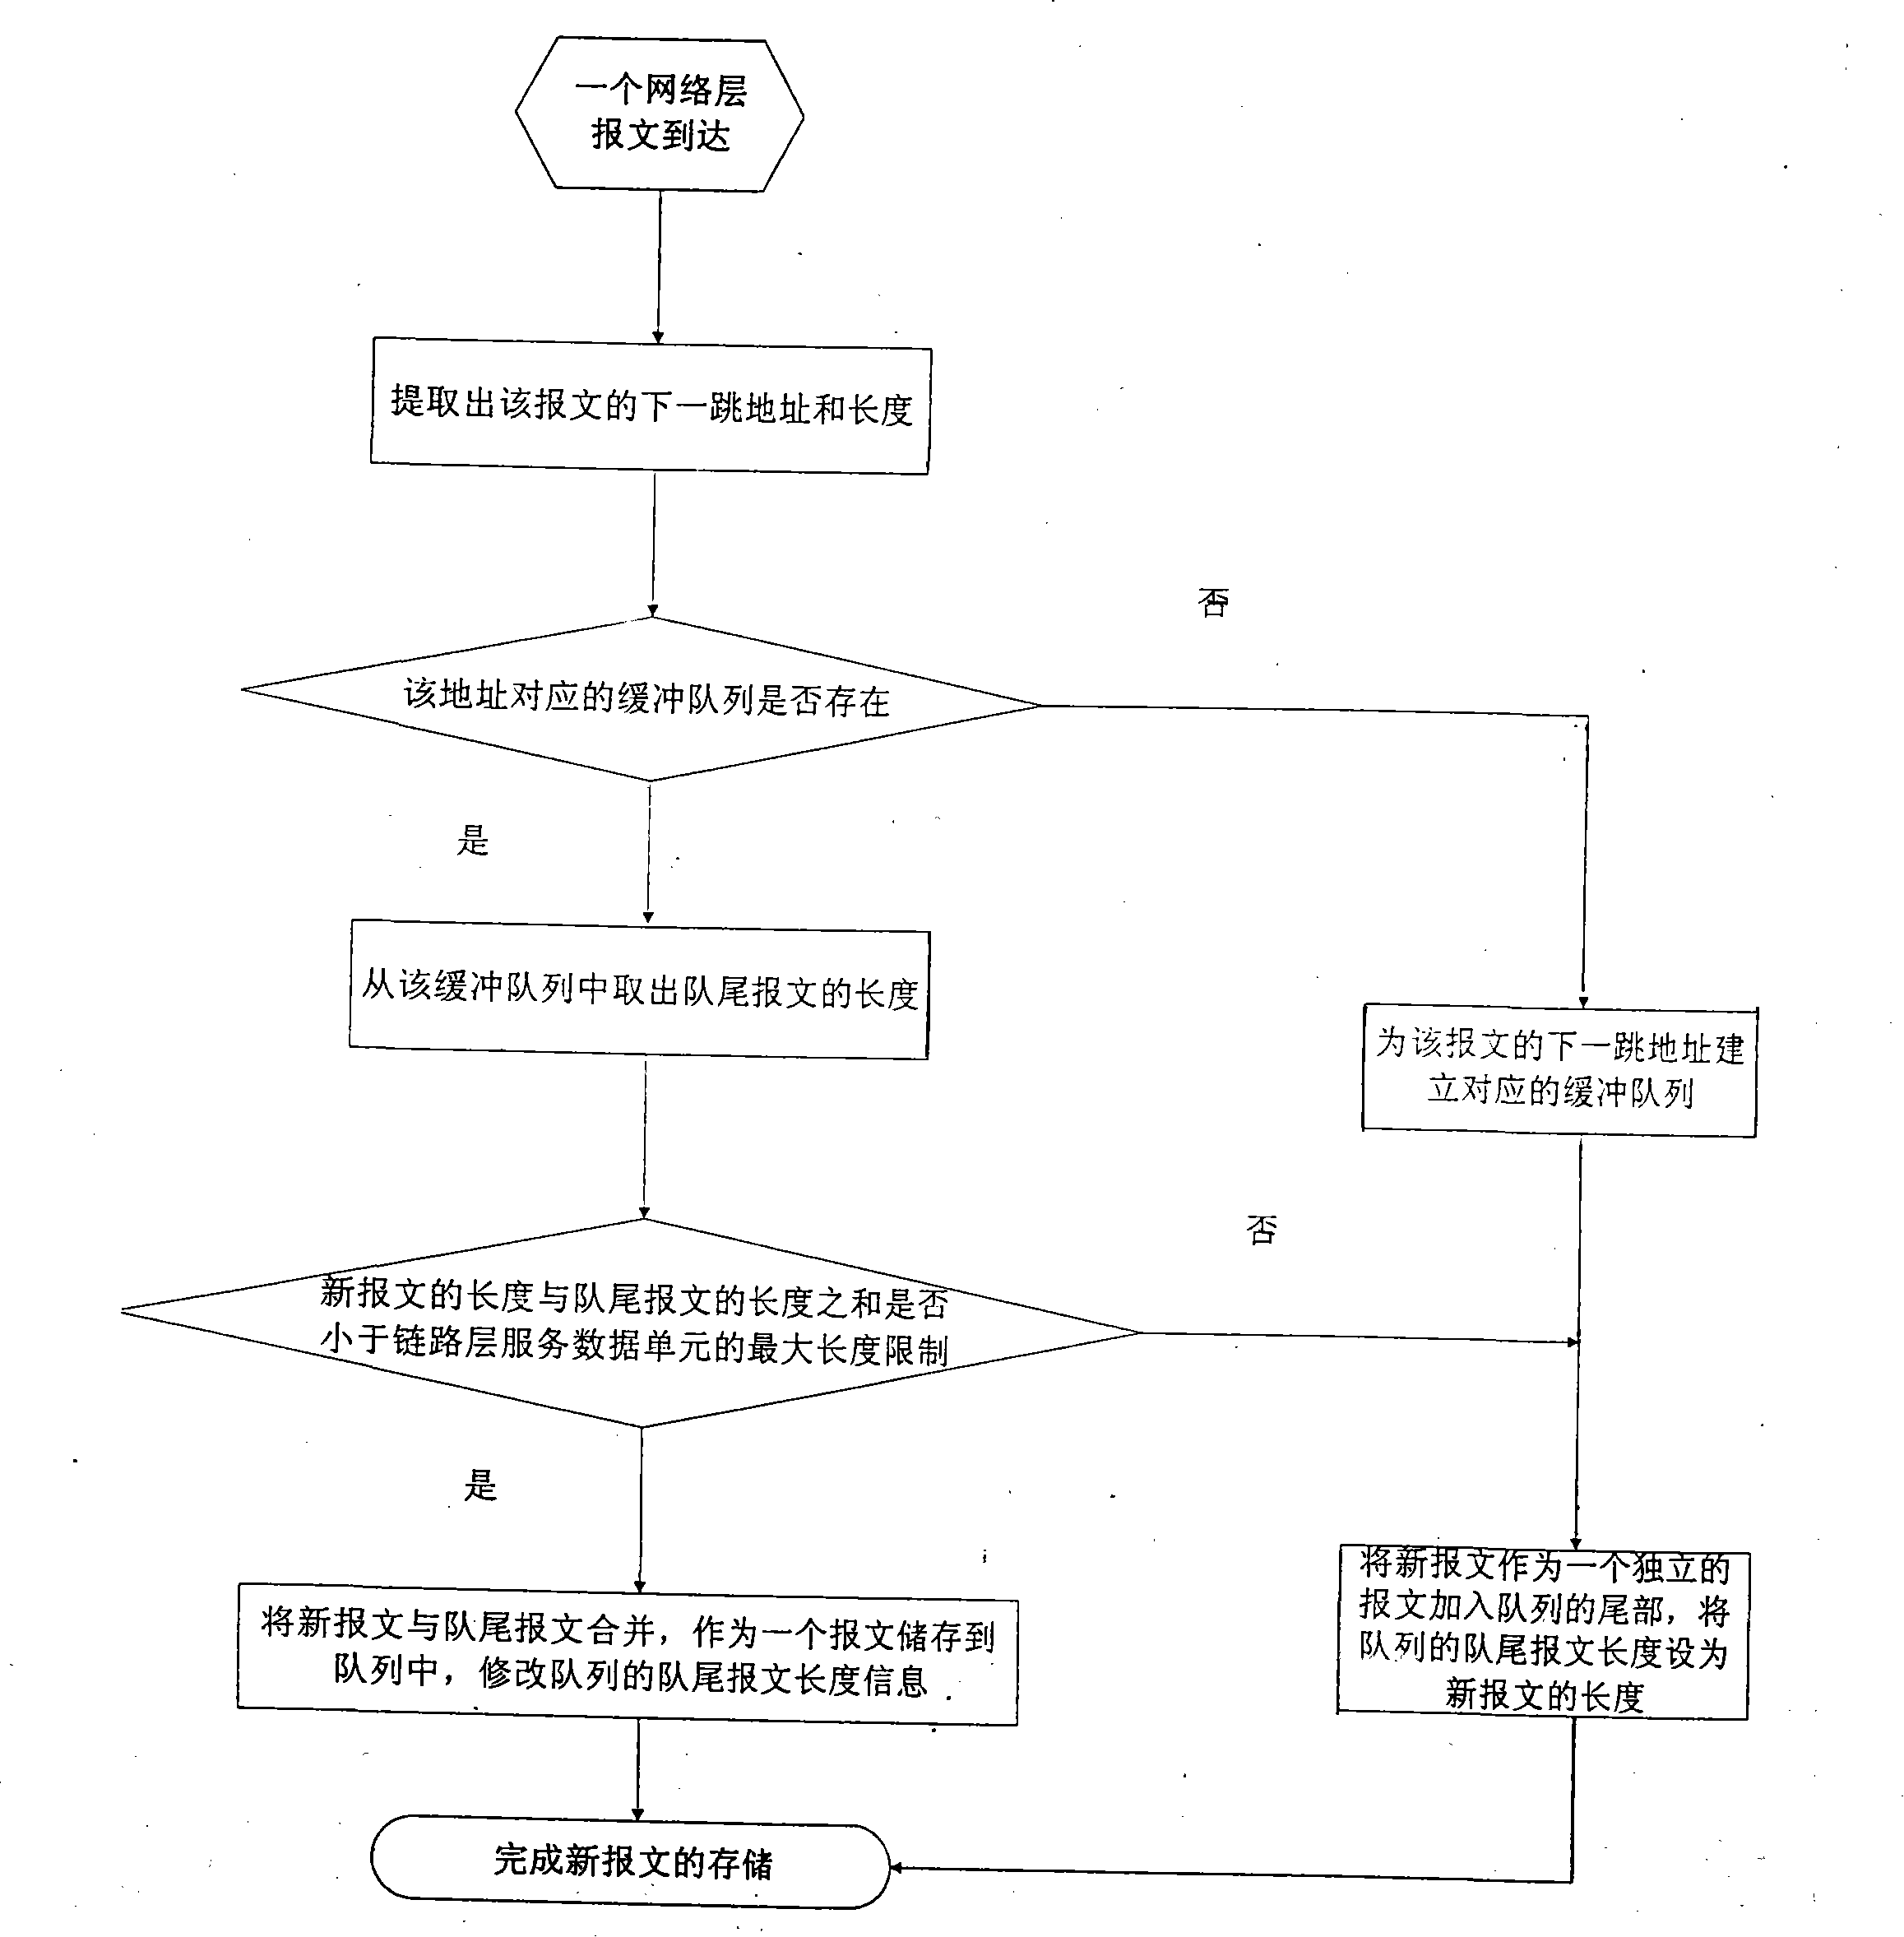 Method for improving mobile self-organizing network communication capacity through link layer message combination